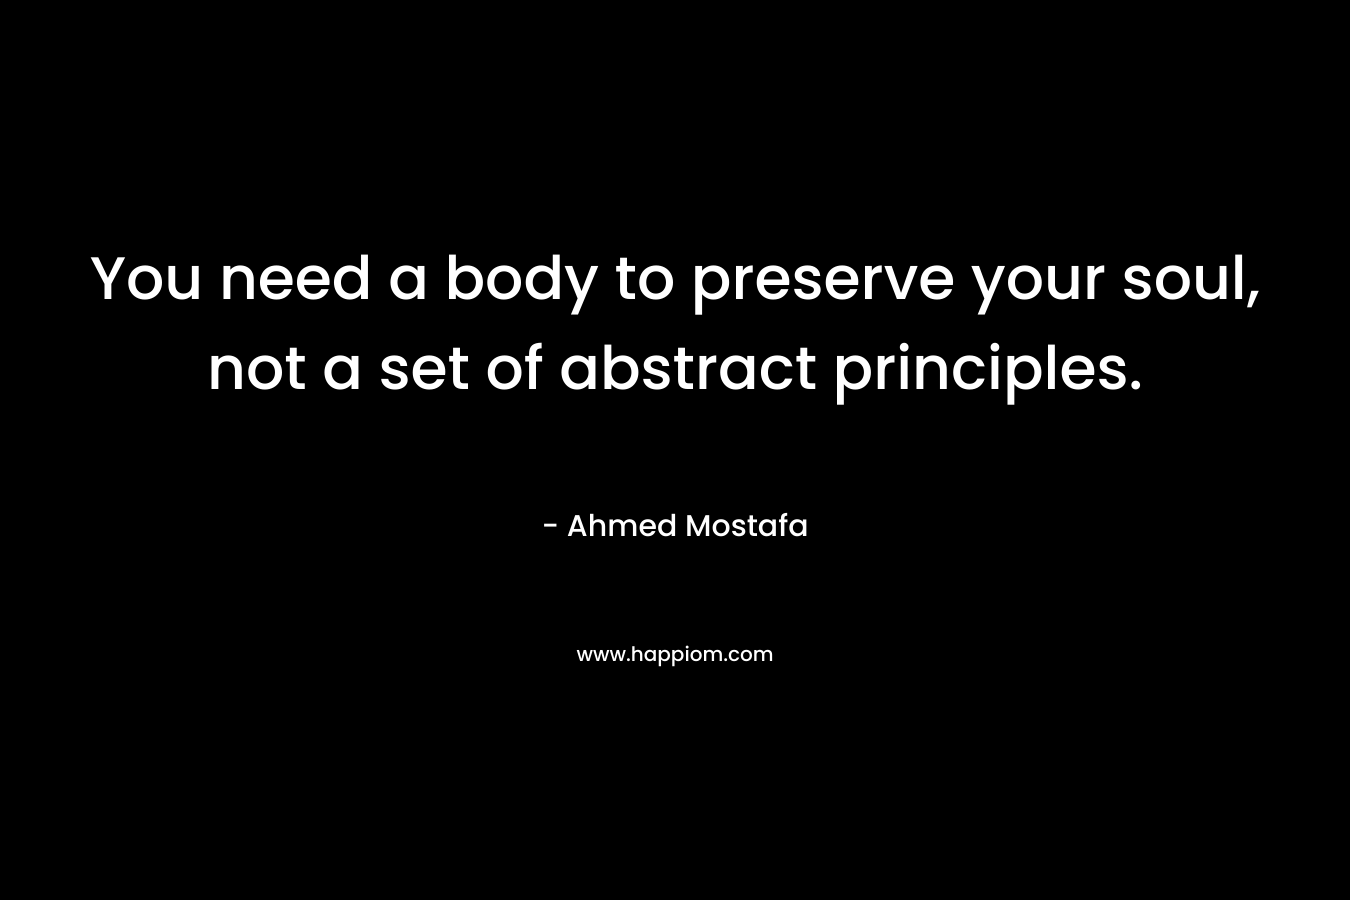 You need a body to preserve your soul, not a set of abstract principles.